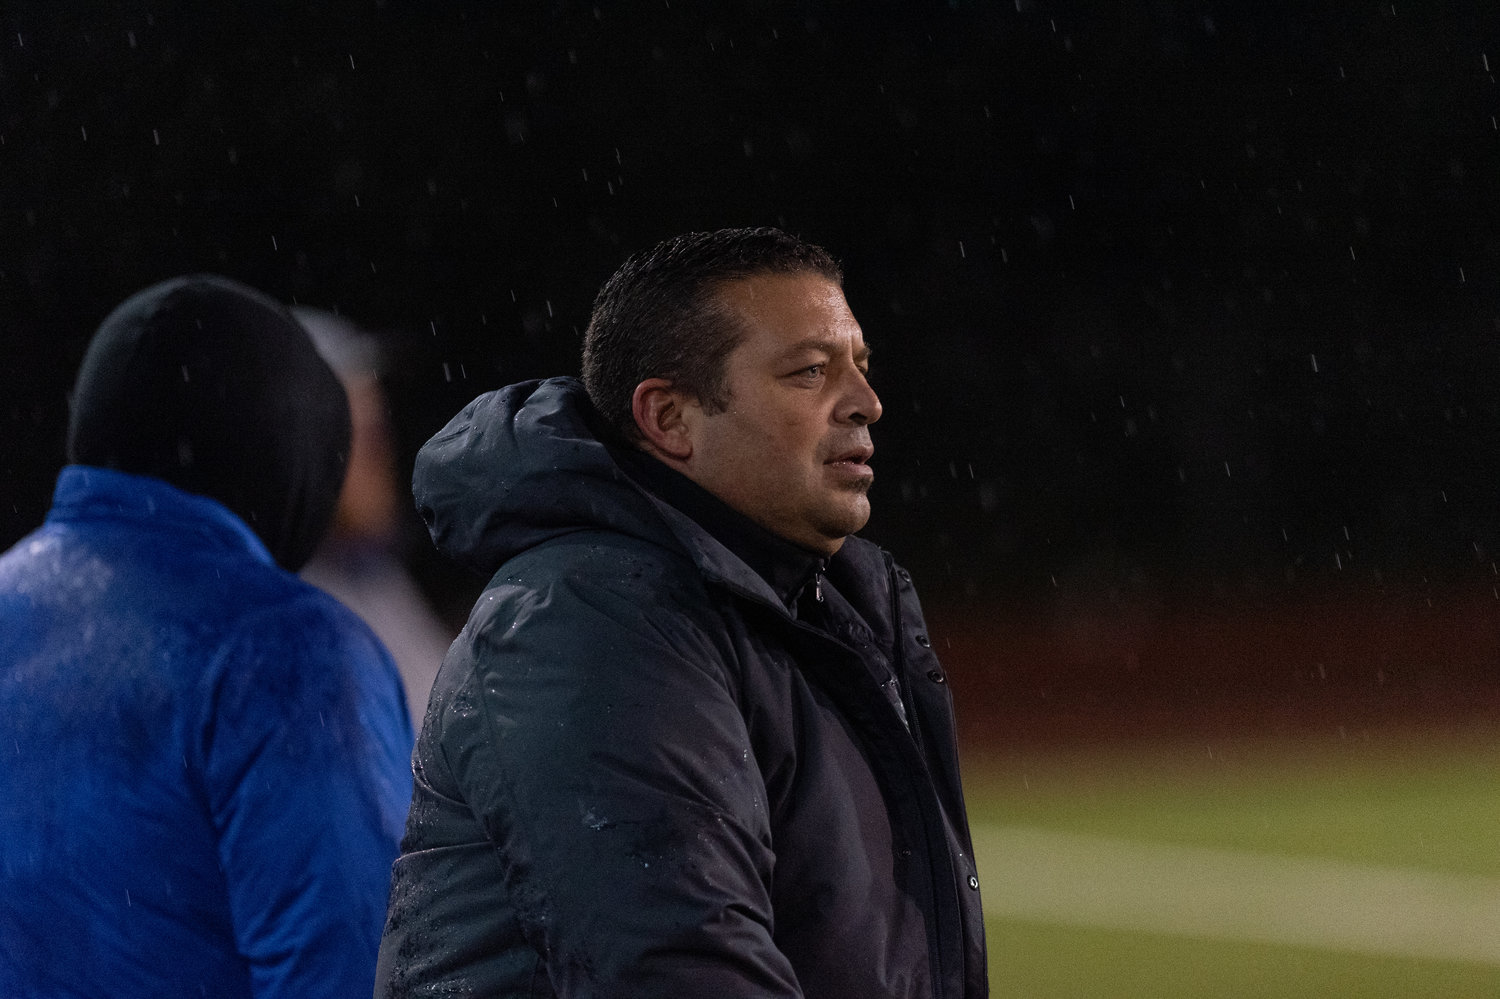 Adna head coach Horst Malunat stands on the sidelines as the Pirates dispatch Cle Elum-Roslyn in the first round of the state tournament in Tumwater Nov. 10.